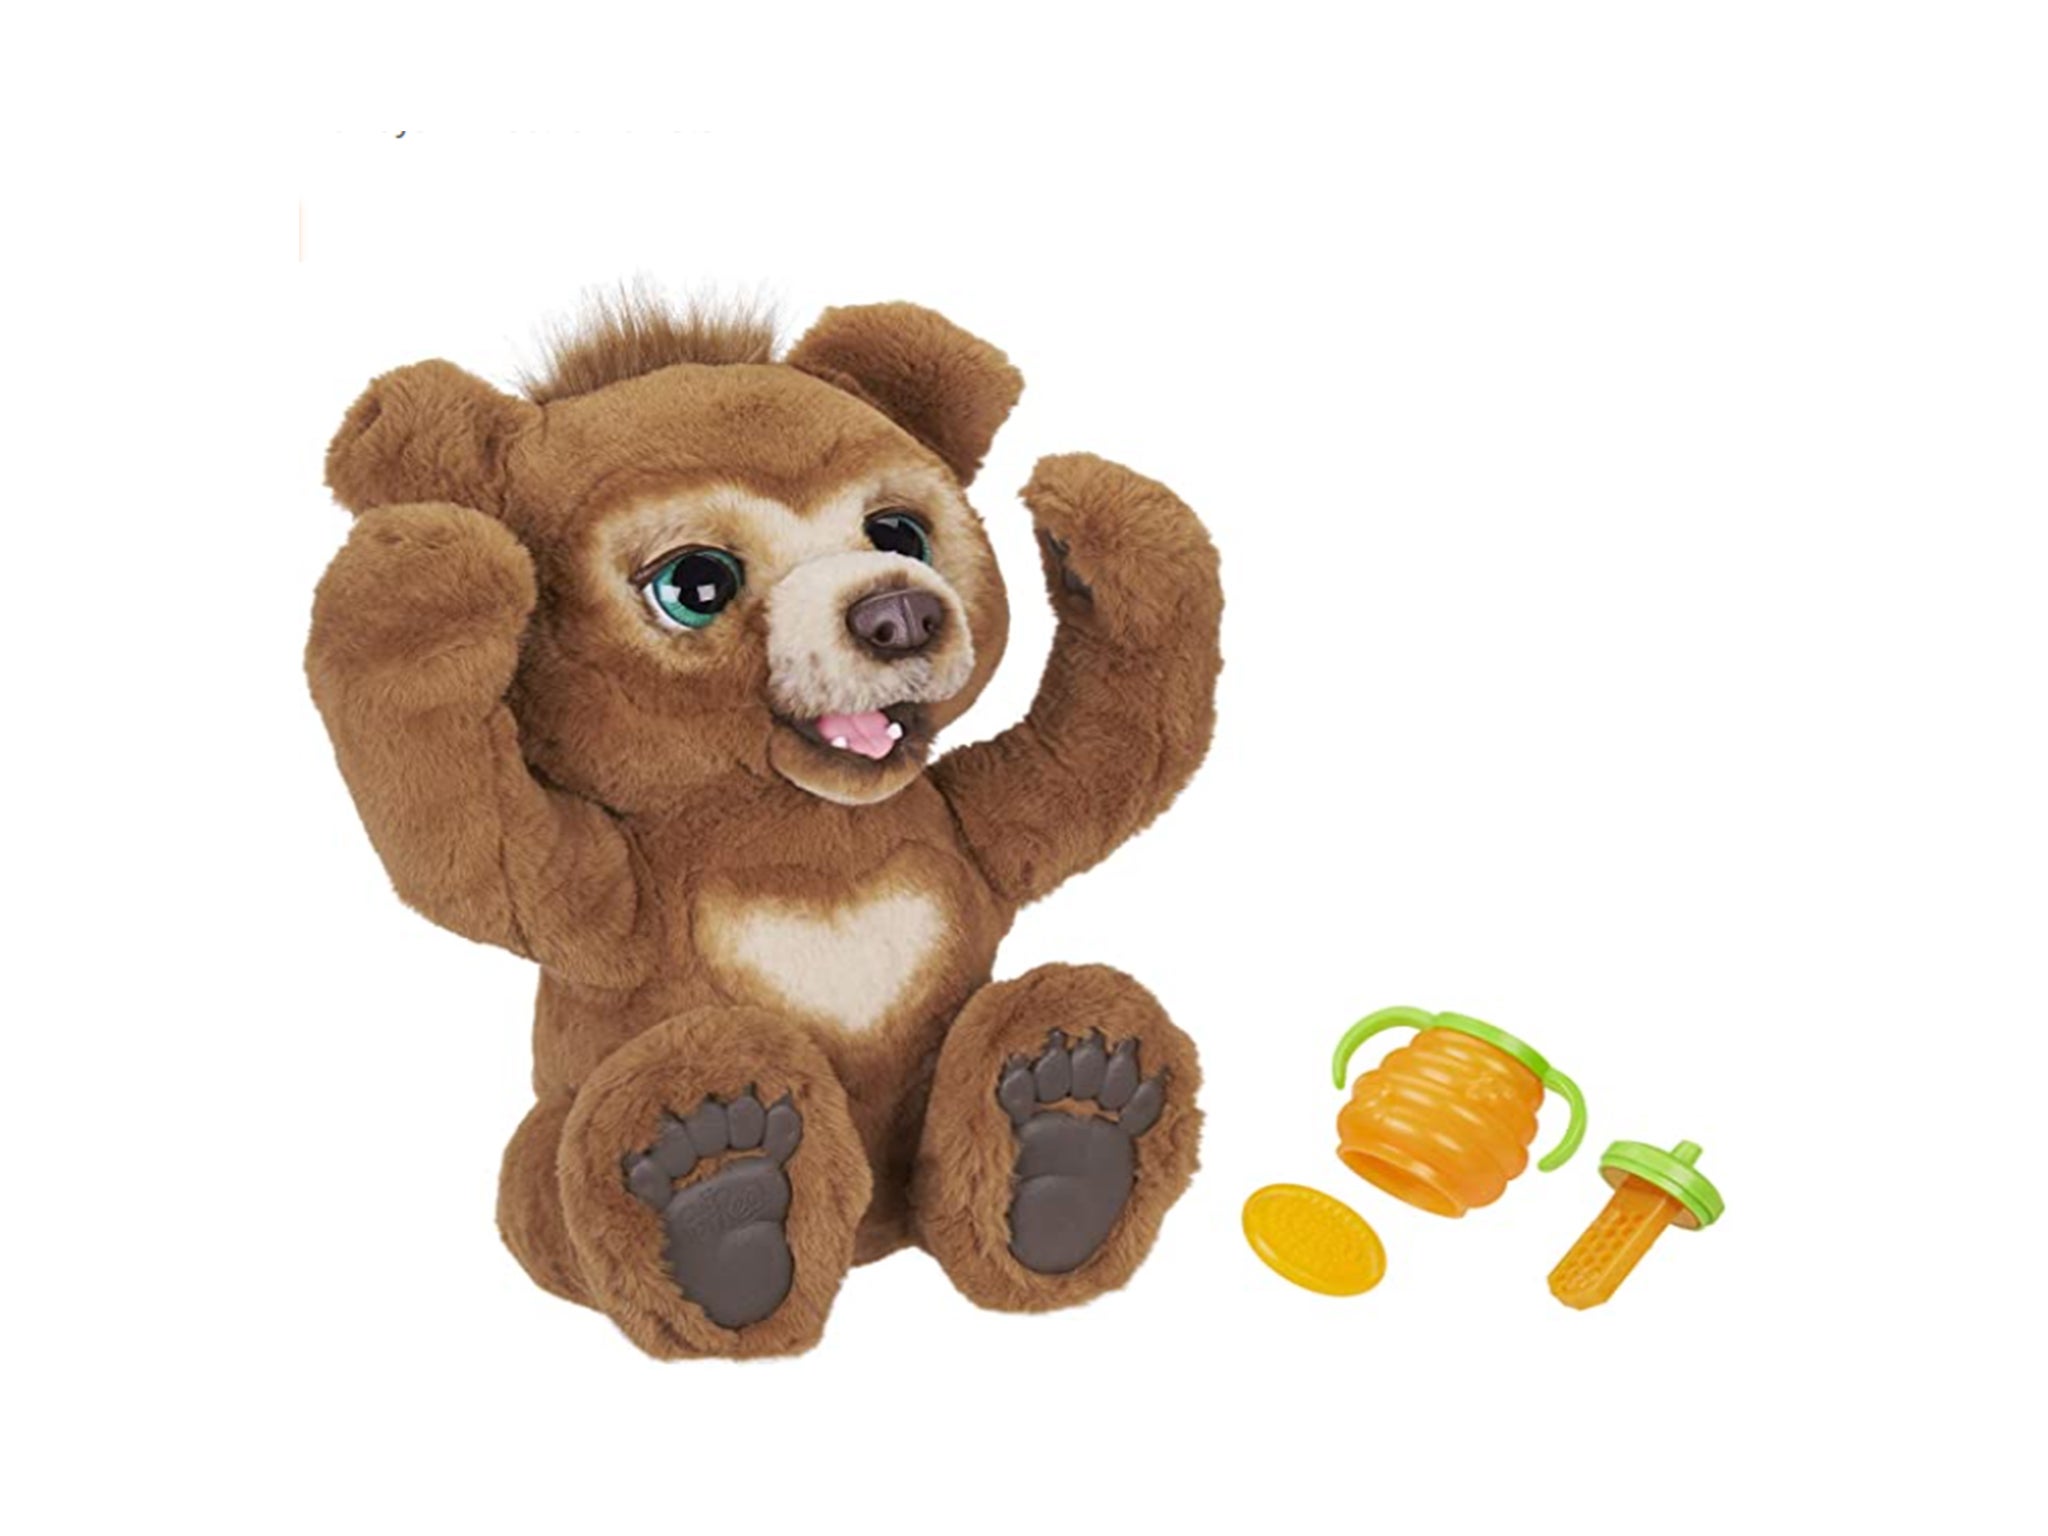 A great toy if your child loves cuddlies